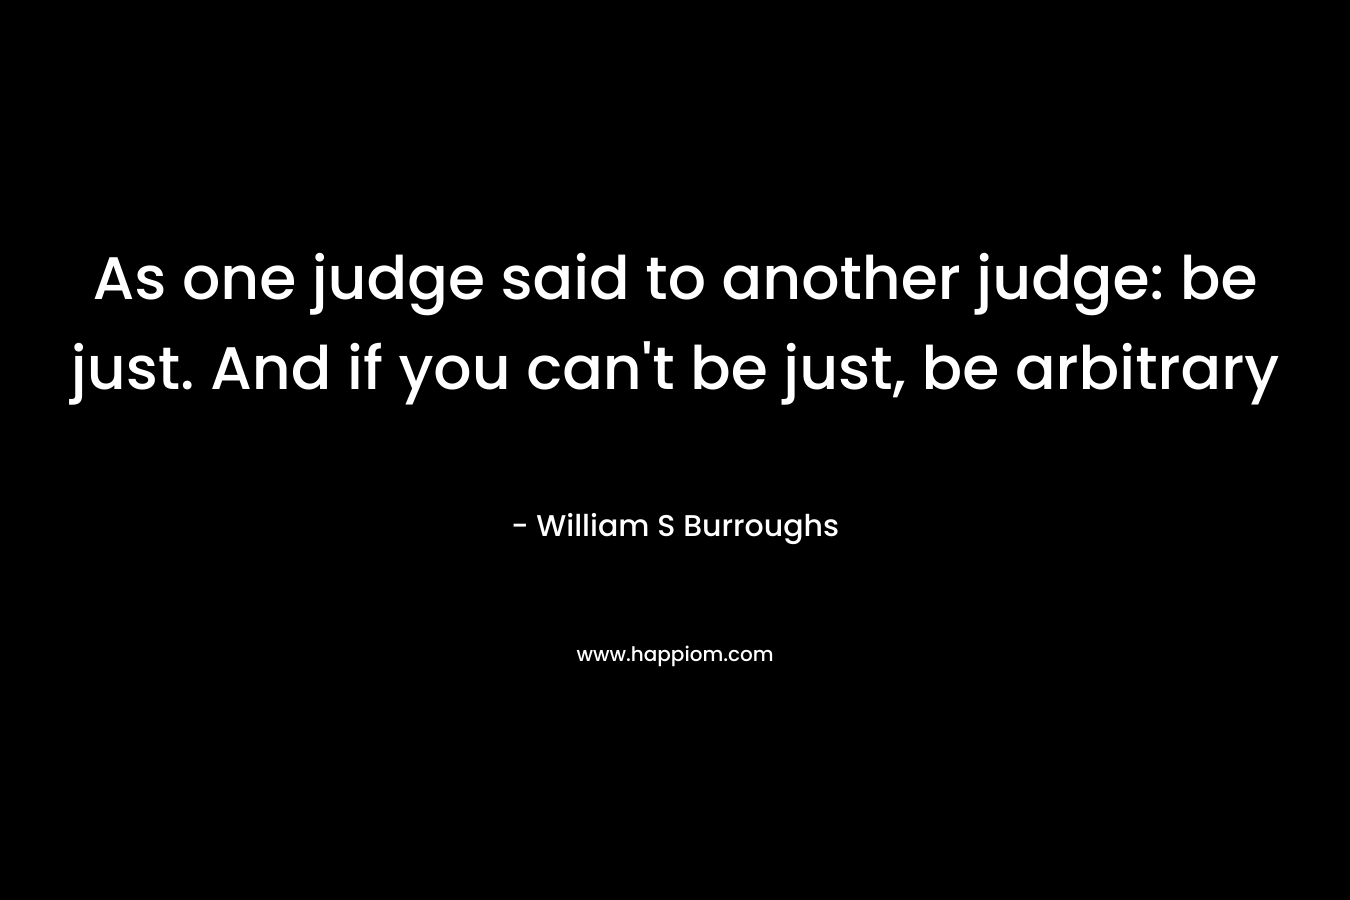 As one judge said to another judge: be just. And if you can’t be just, be arbitrary – William S Burroughs